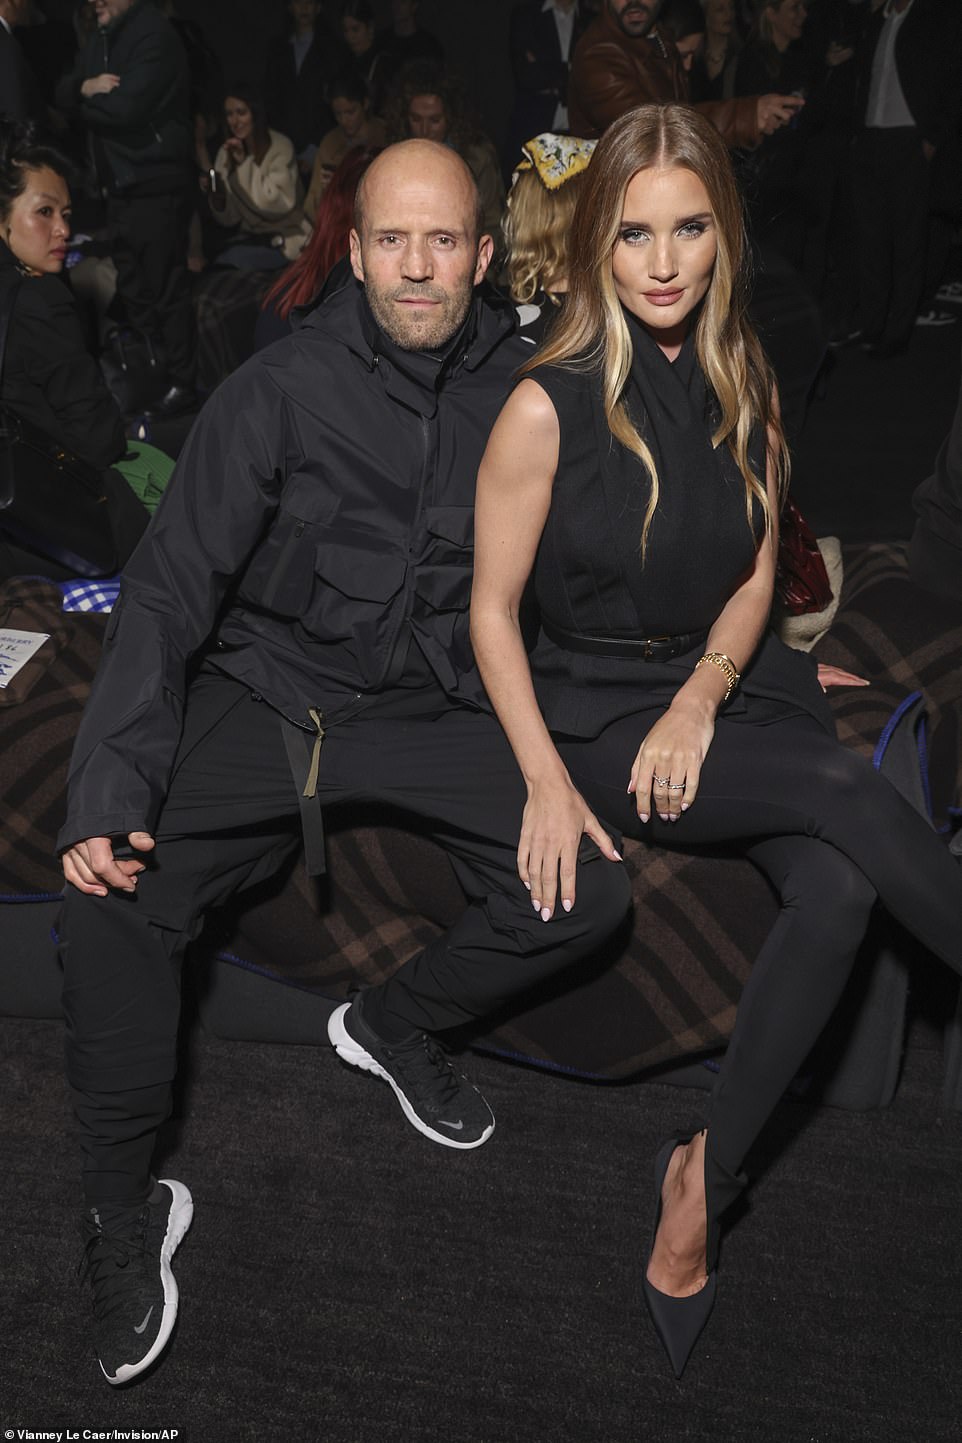 Loved: Rosie Huntington Whiteley and Jason Statham had front row seats at the star-studded event